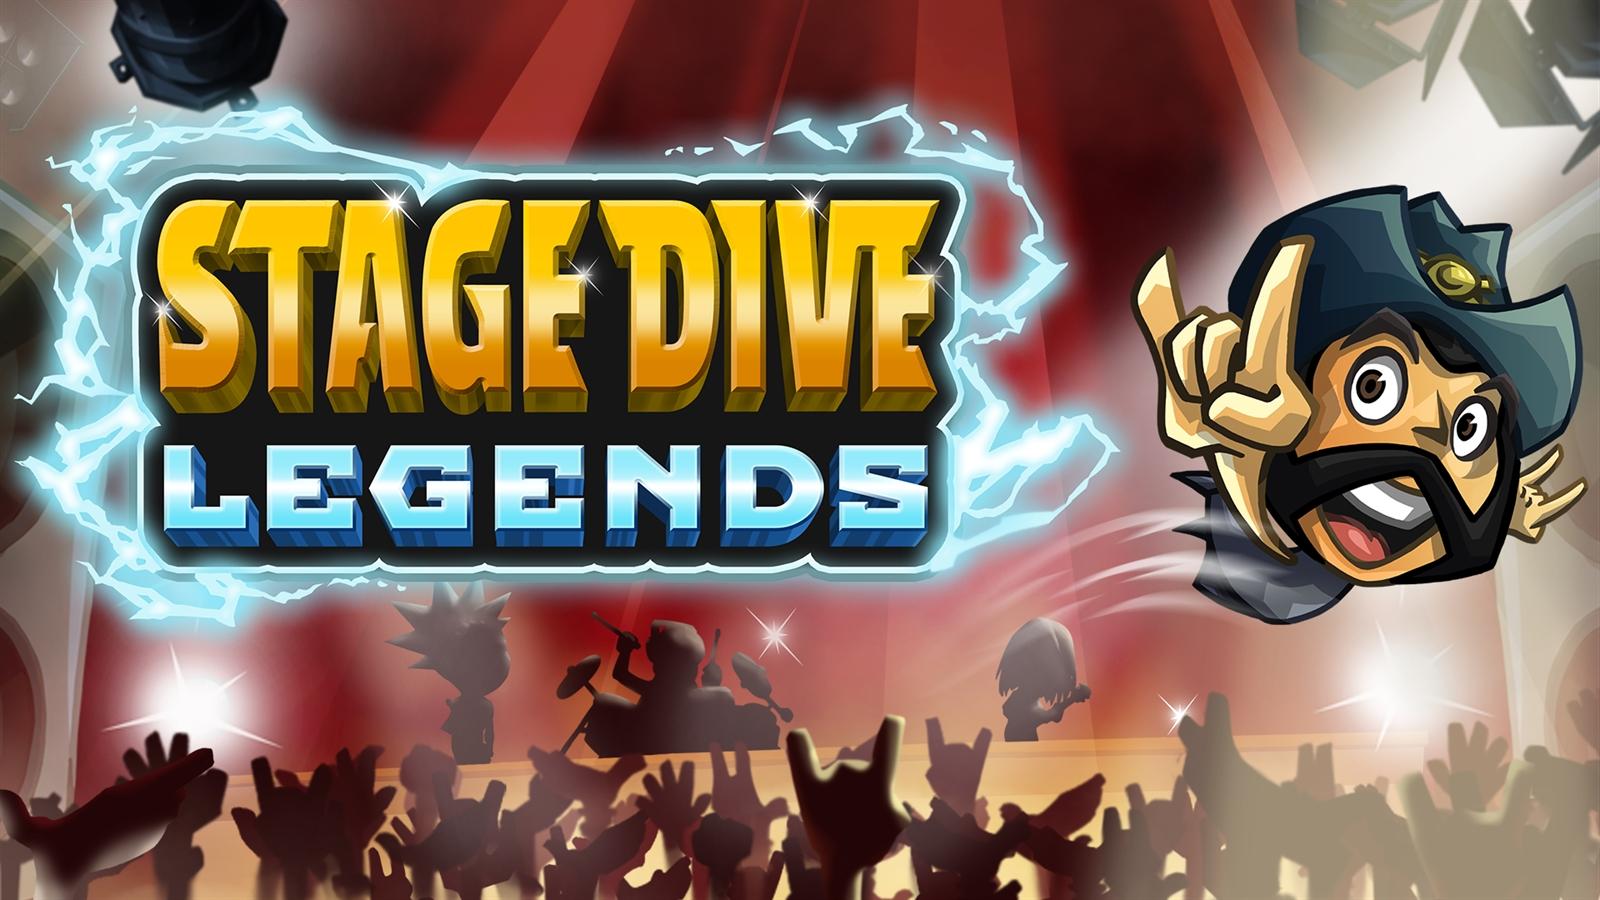 Легенды 5 игра. Legend Stages. Handygames Android. Handy made Legend game. Stage Diving.